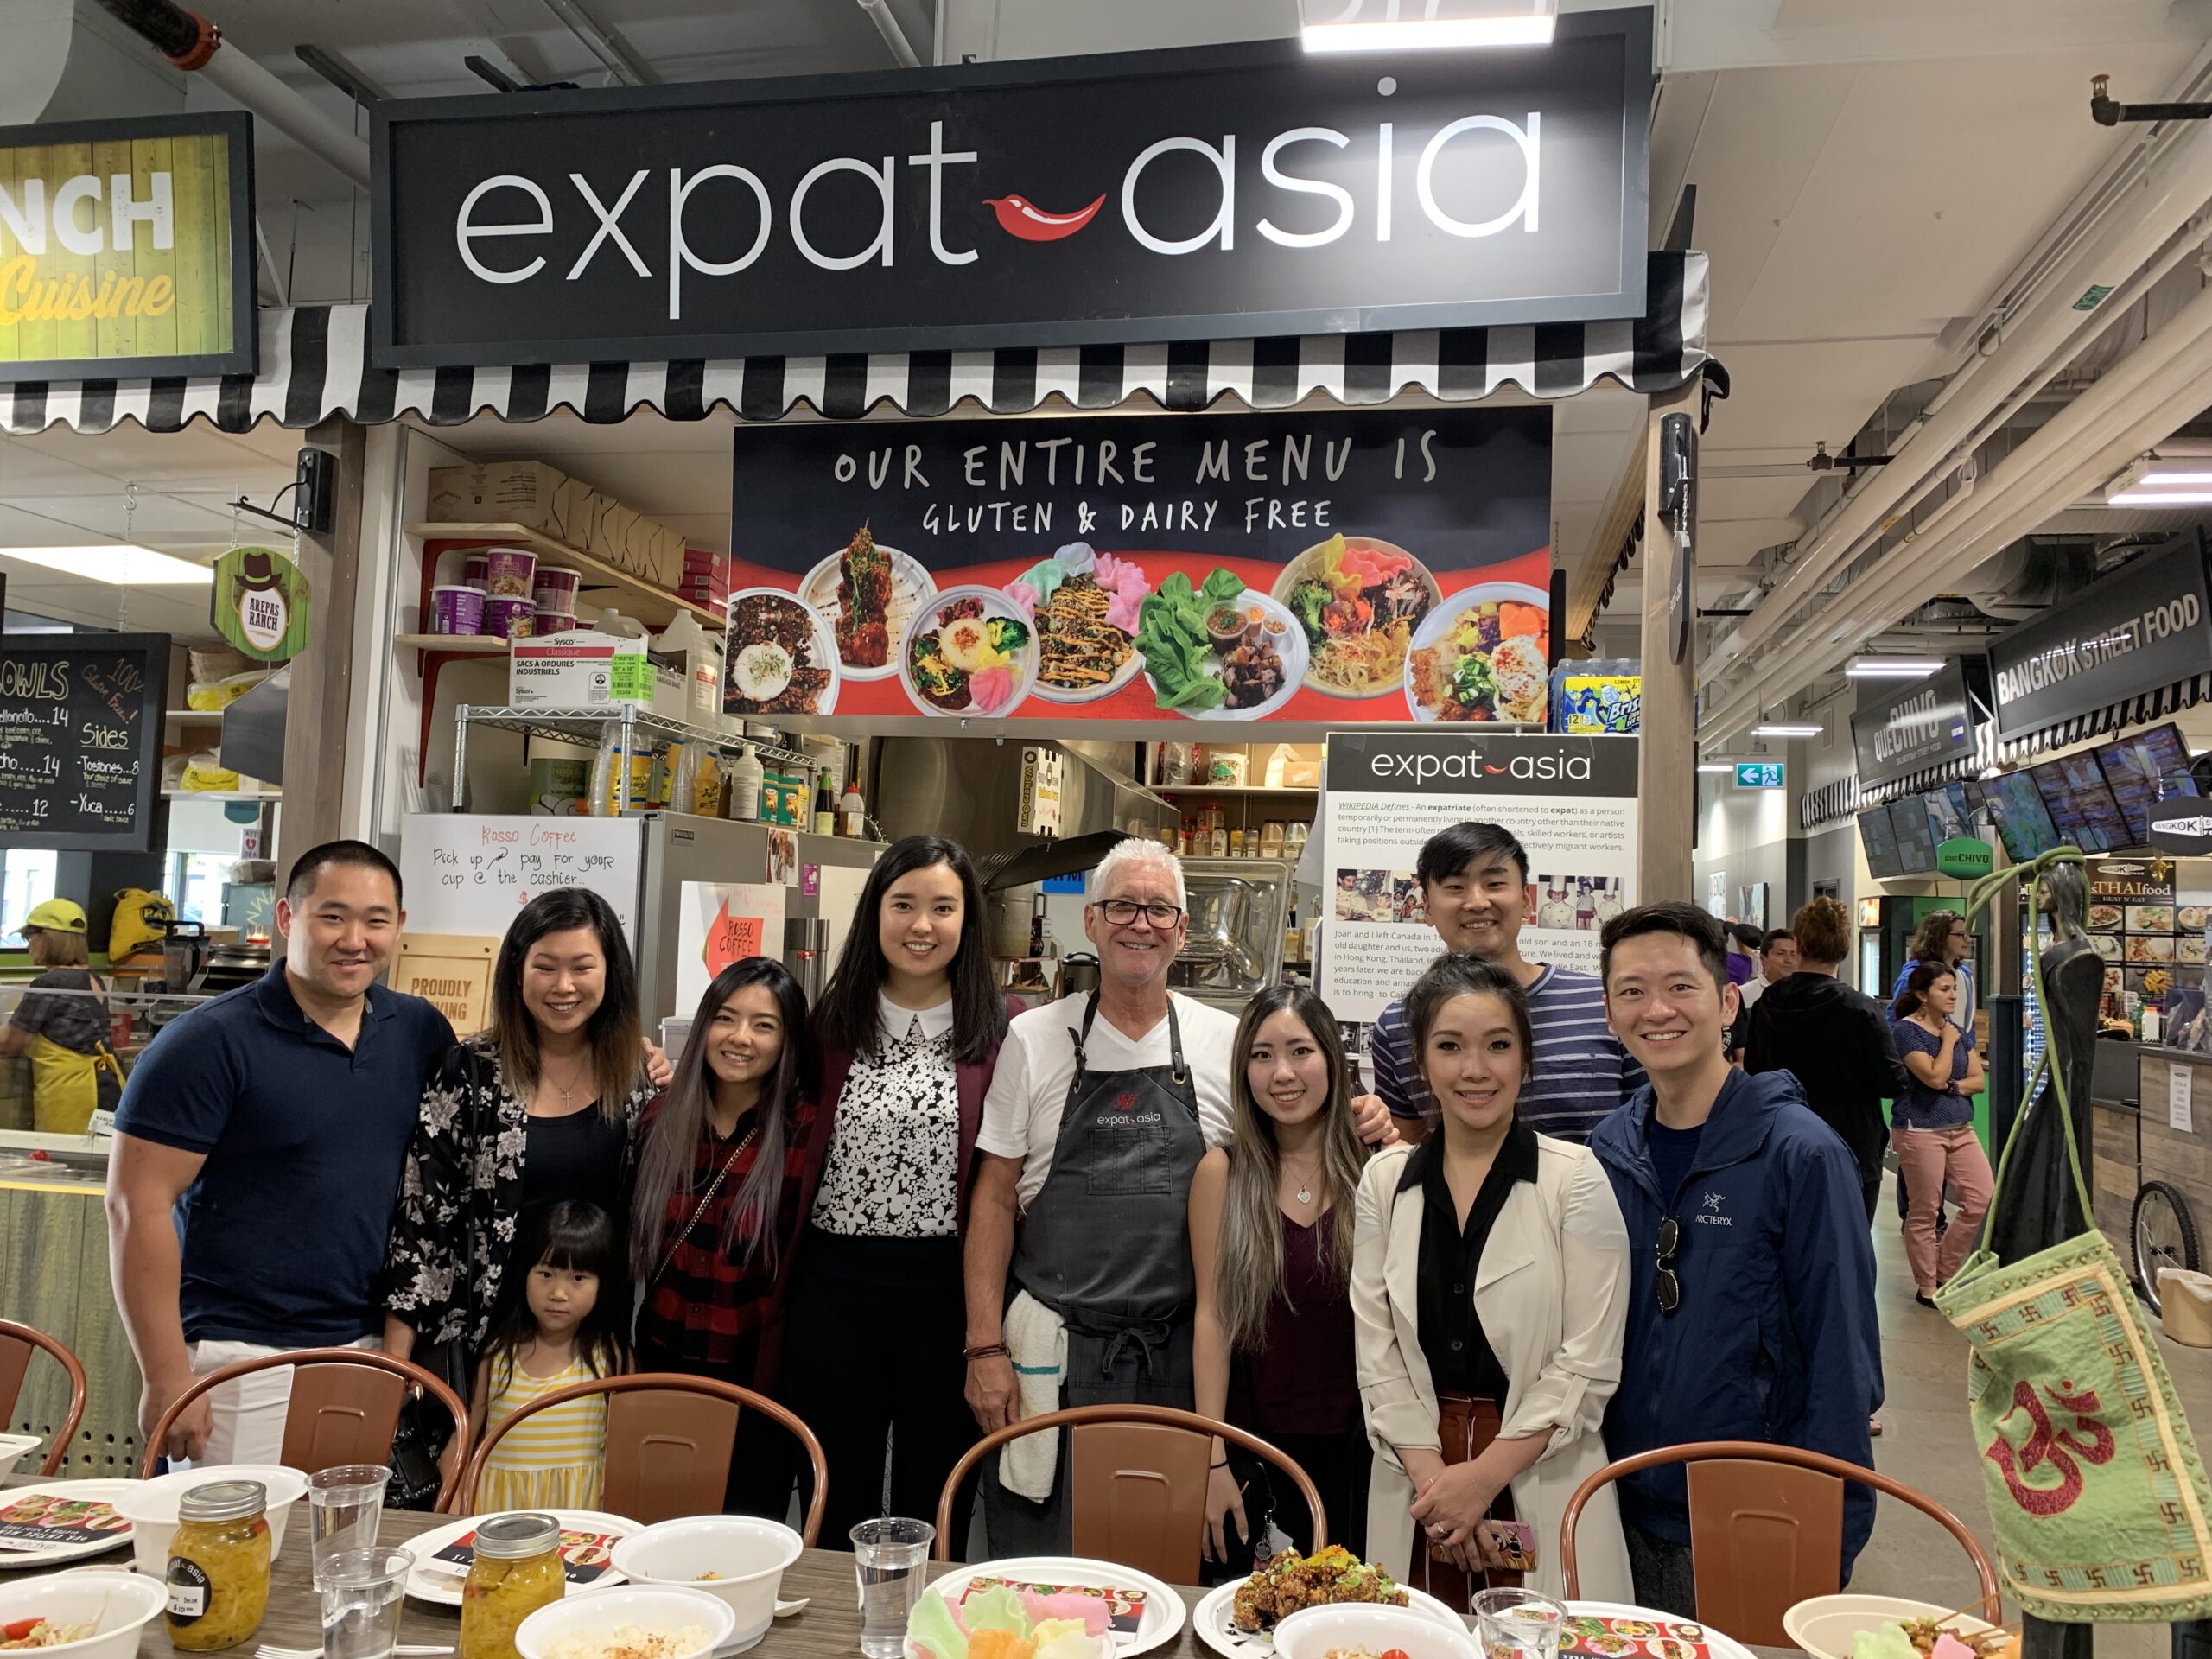 Expat asia in Calgary with loyal customers